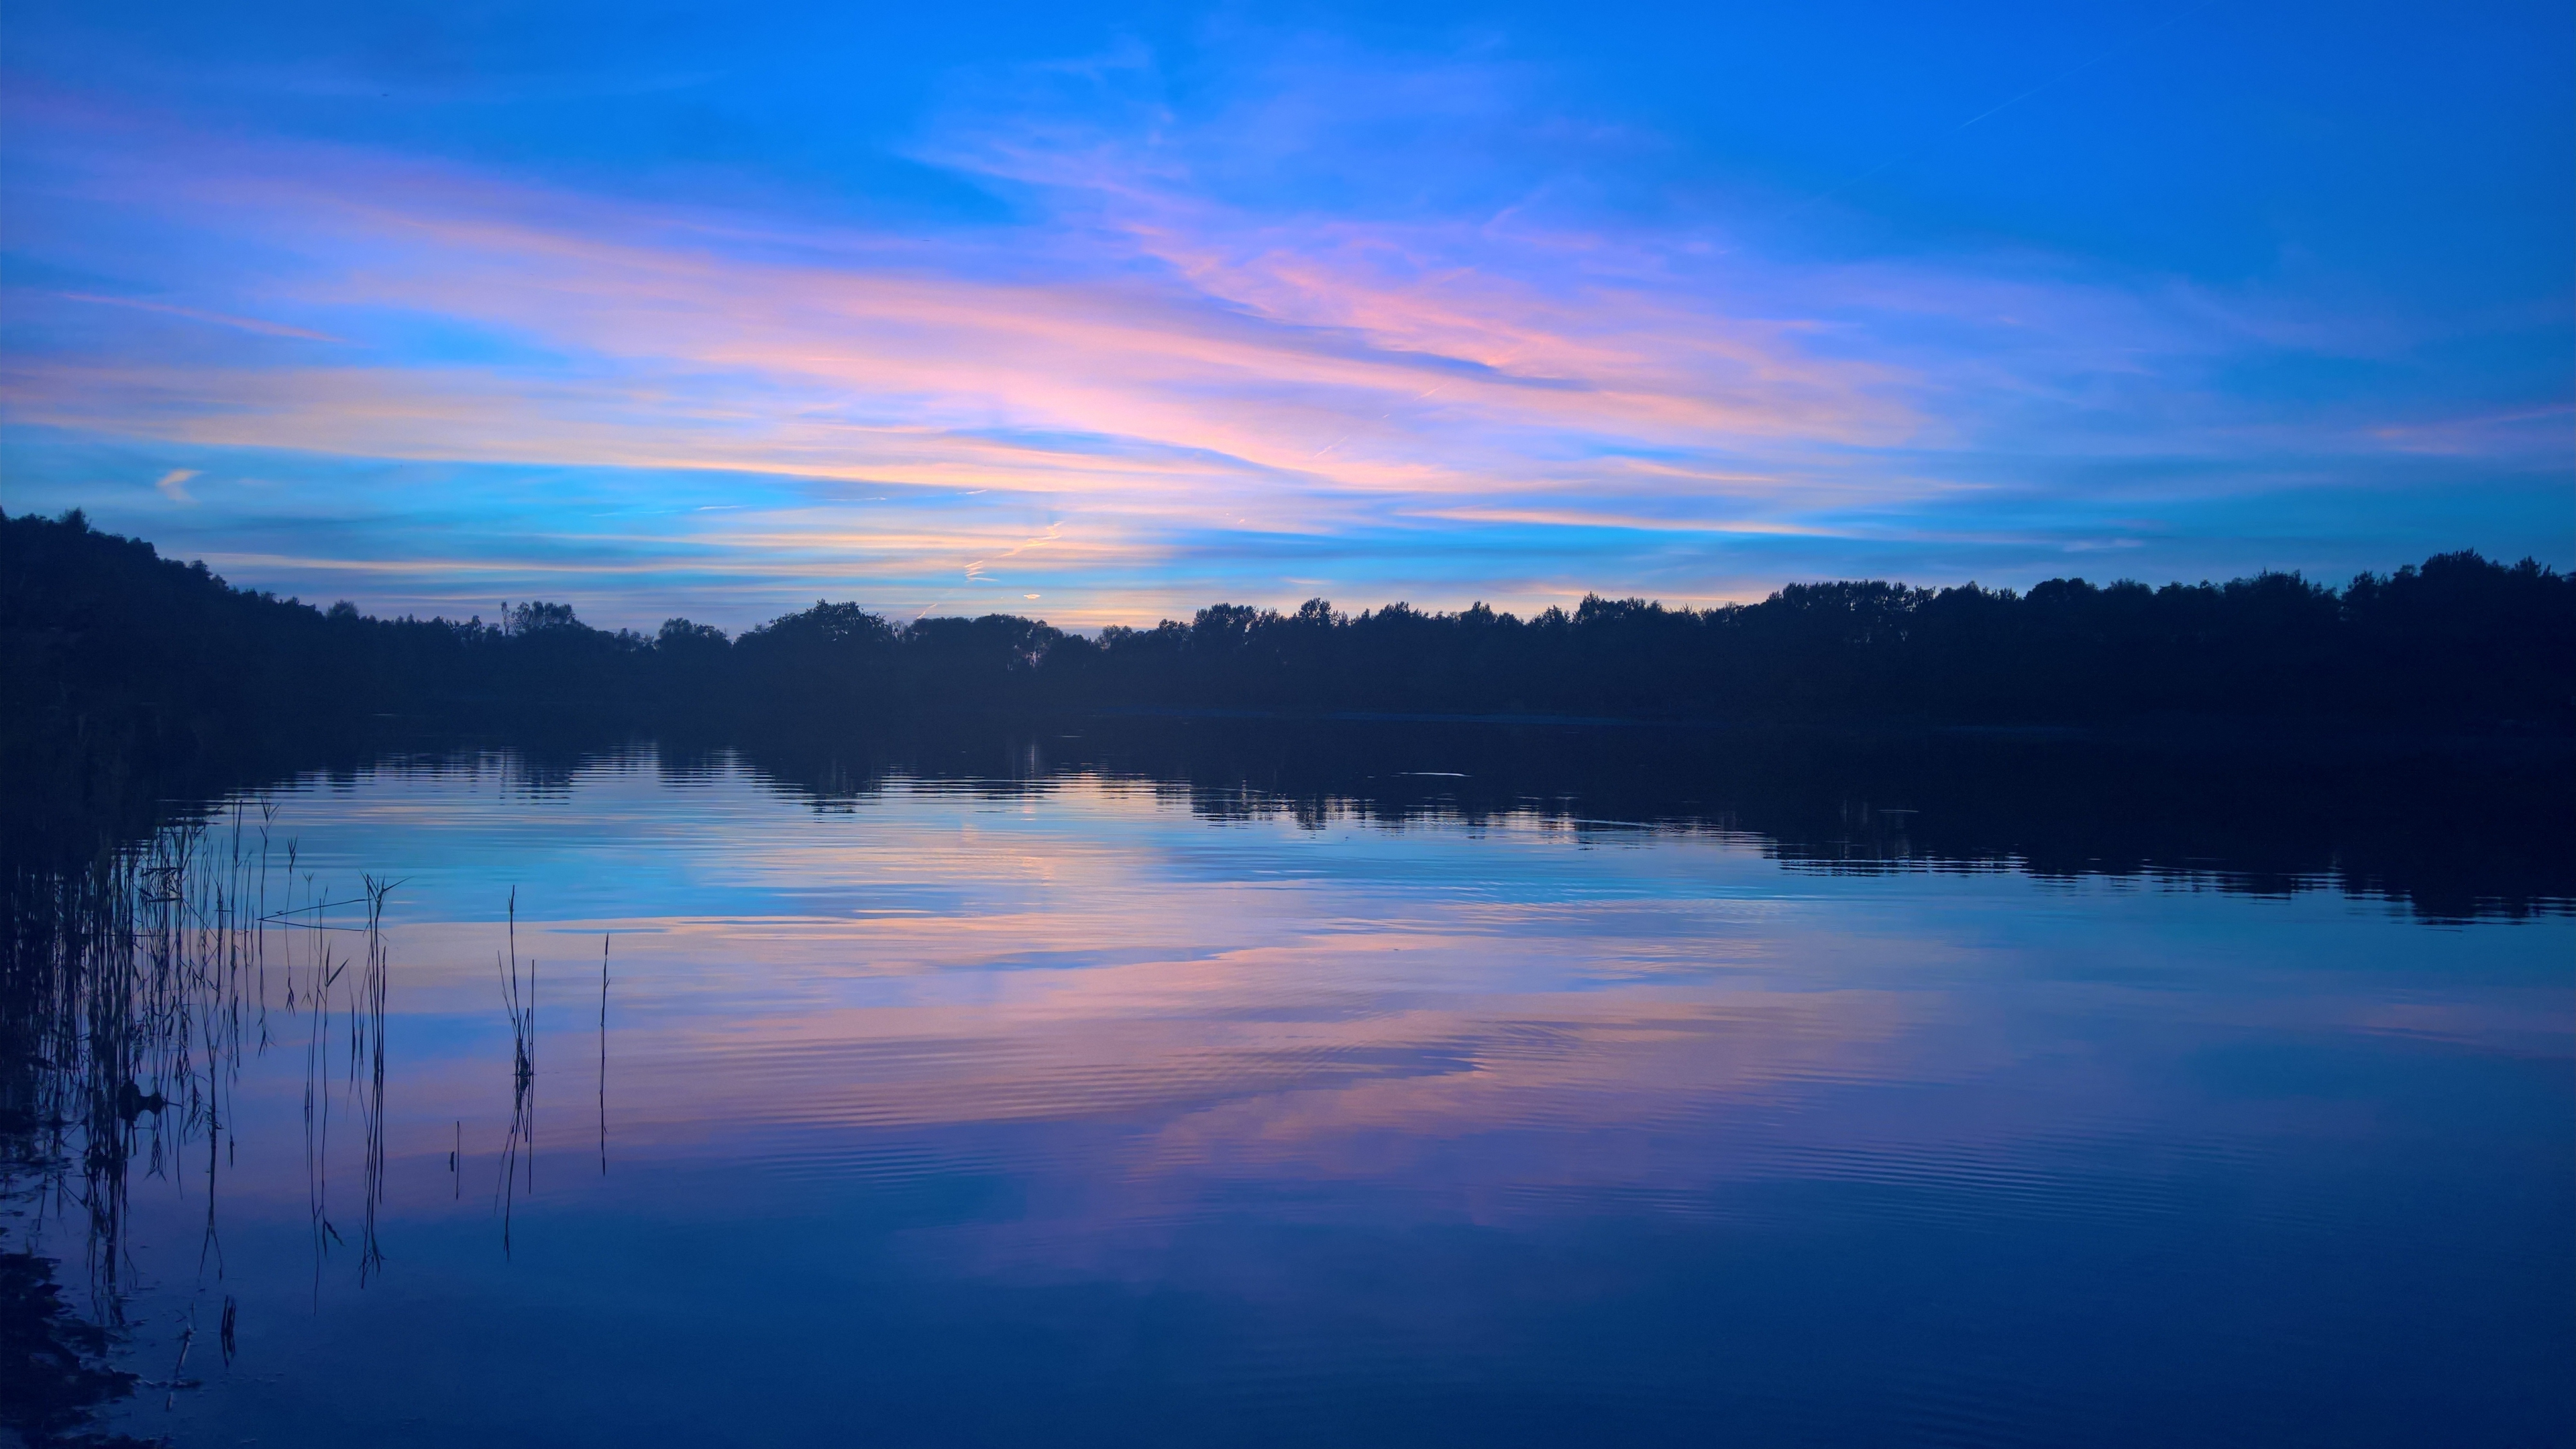 Download 3840x2160 wallpaper blue sky, sunset, lake, reflections